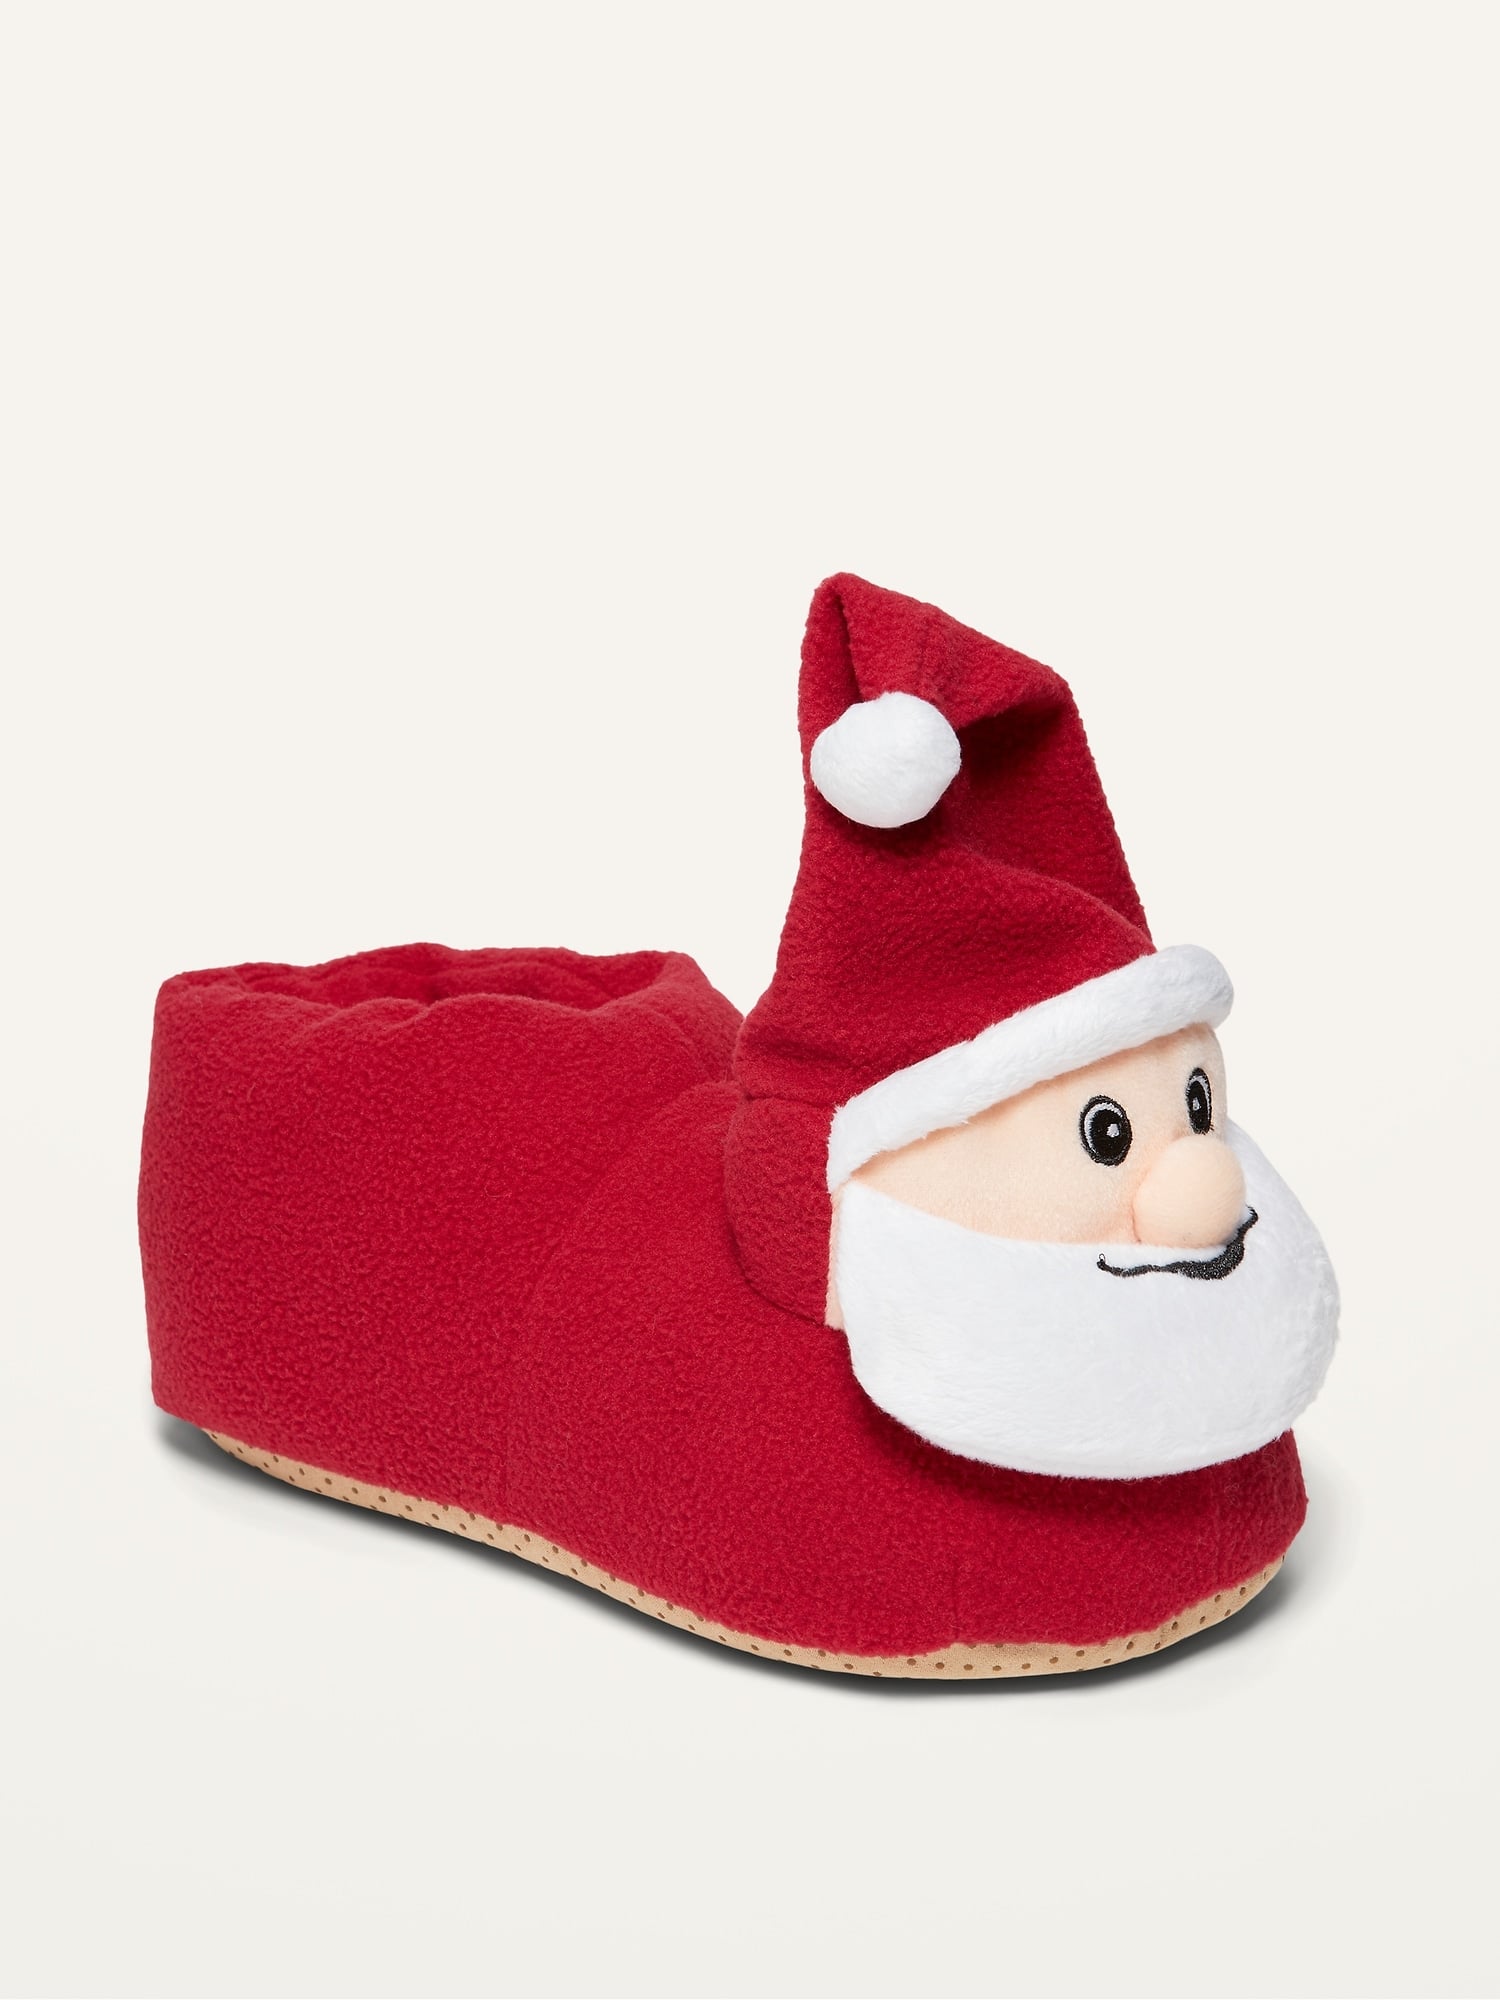 Cosy Christmas Slippers for Men